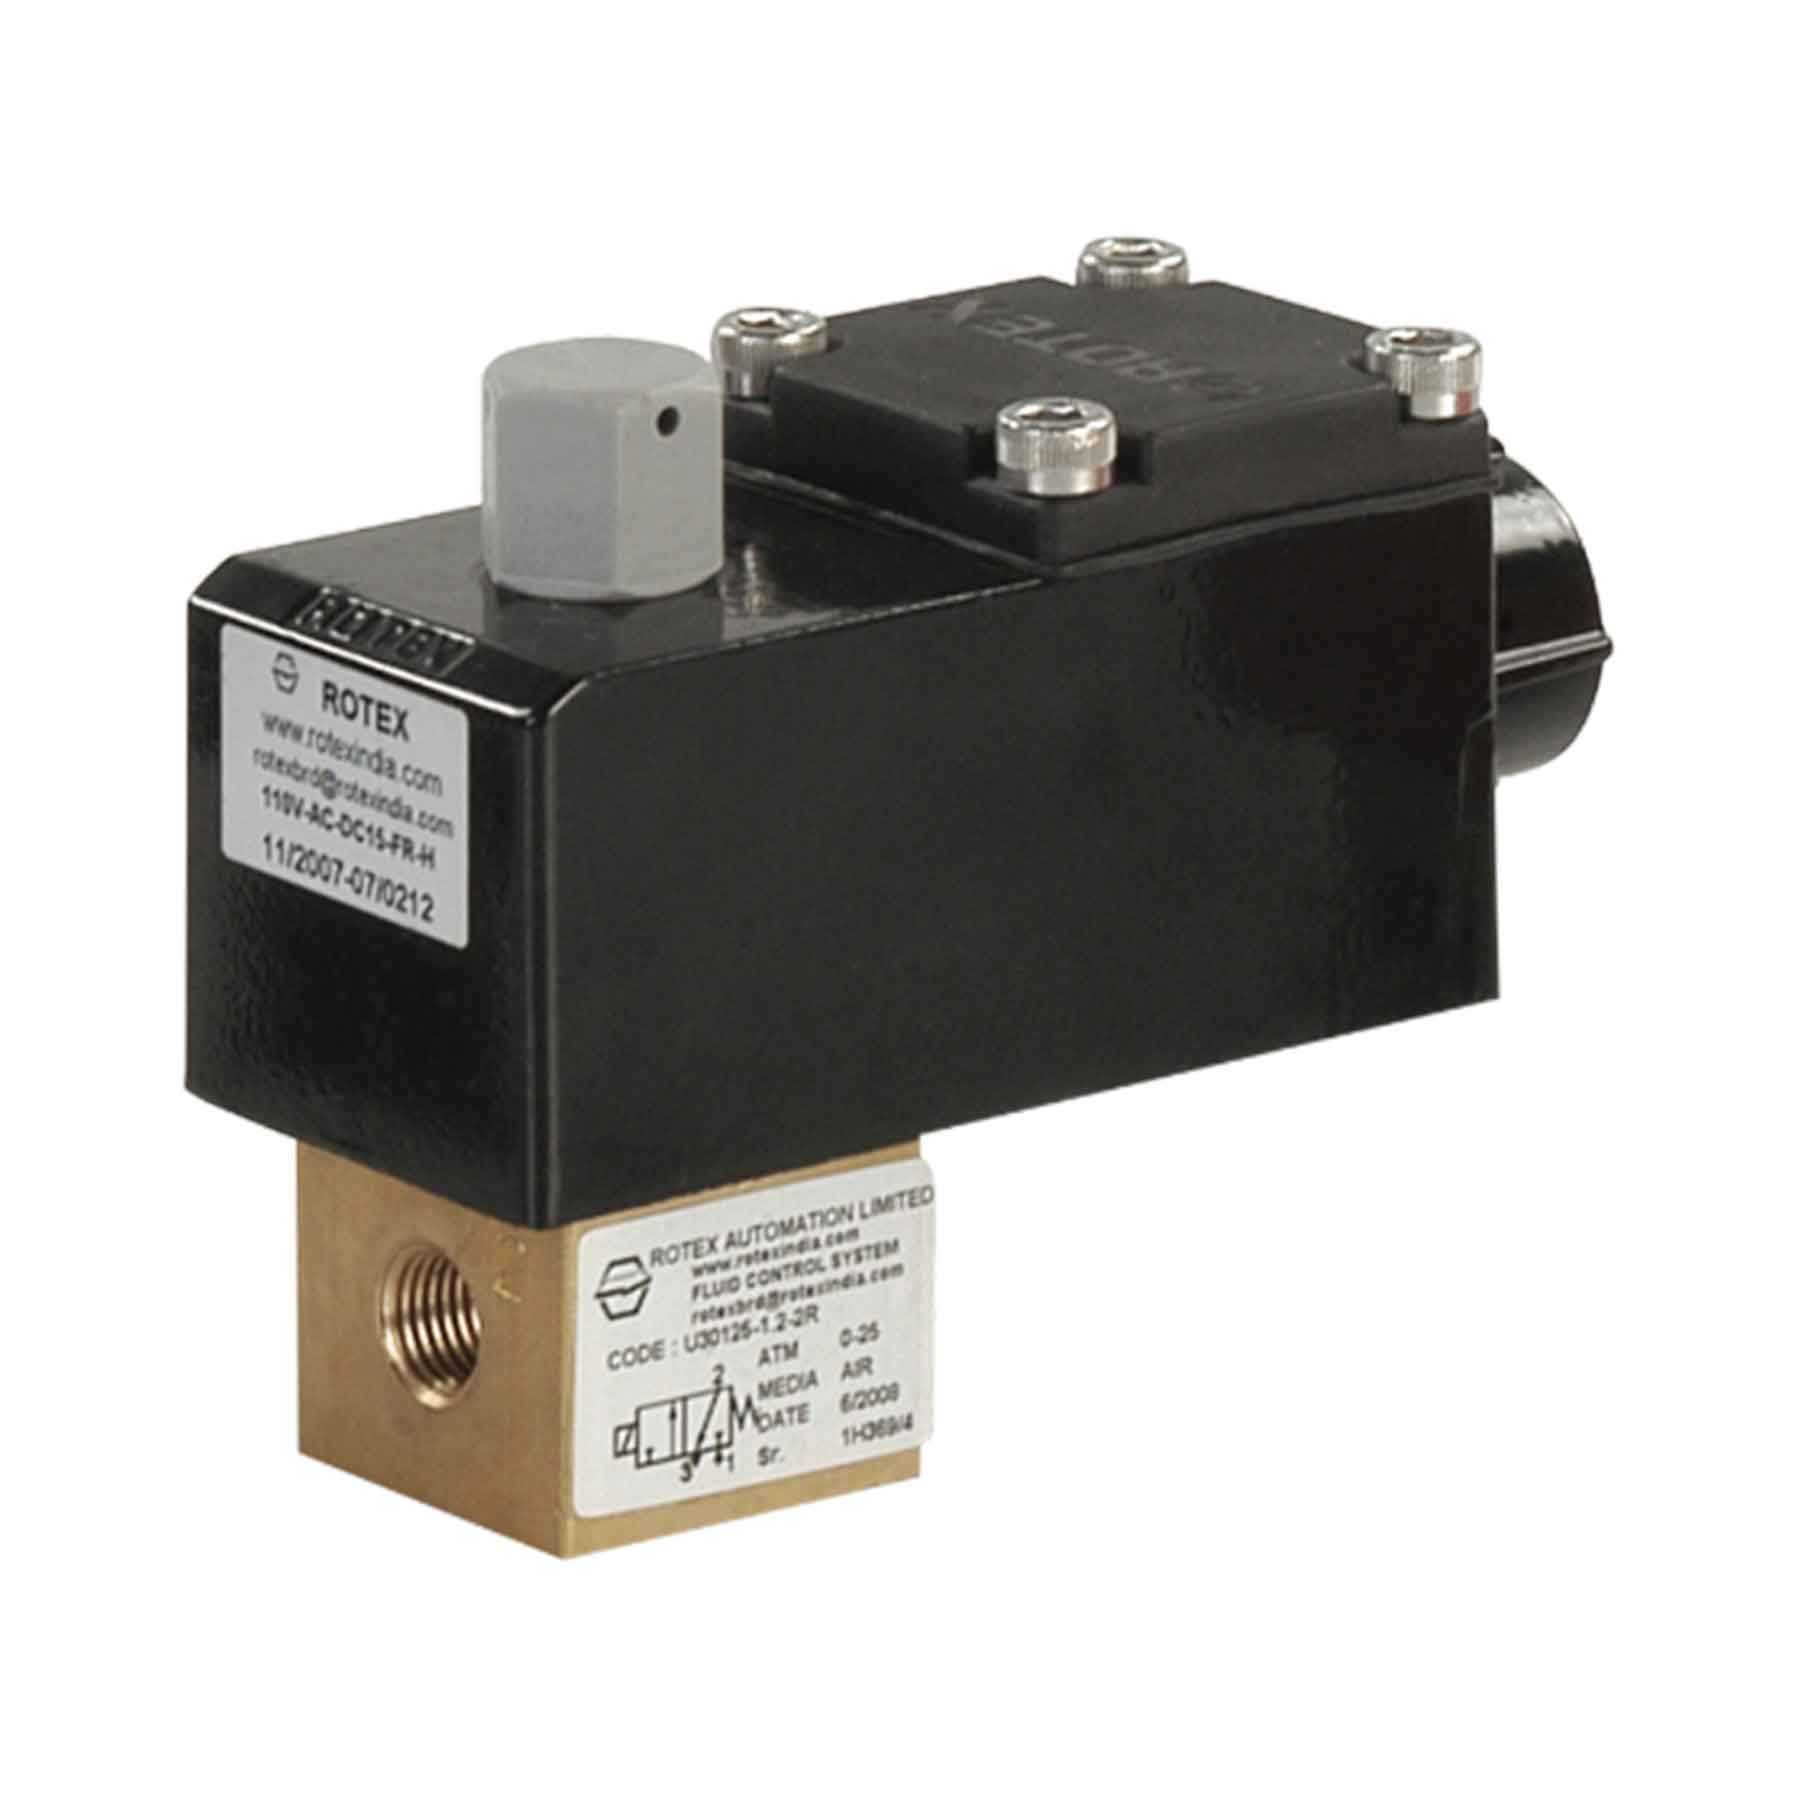 Rotex 2/2-Way Normally Closed Direct Lift Solenoid Valve 20101-2.5-2G-B2+III-24V-DC-39-H-01